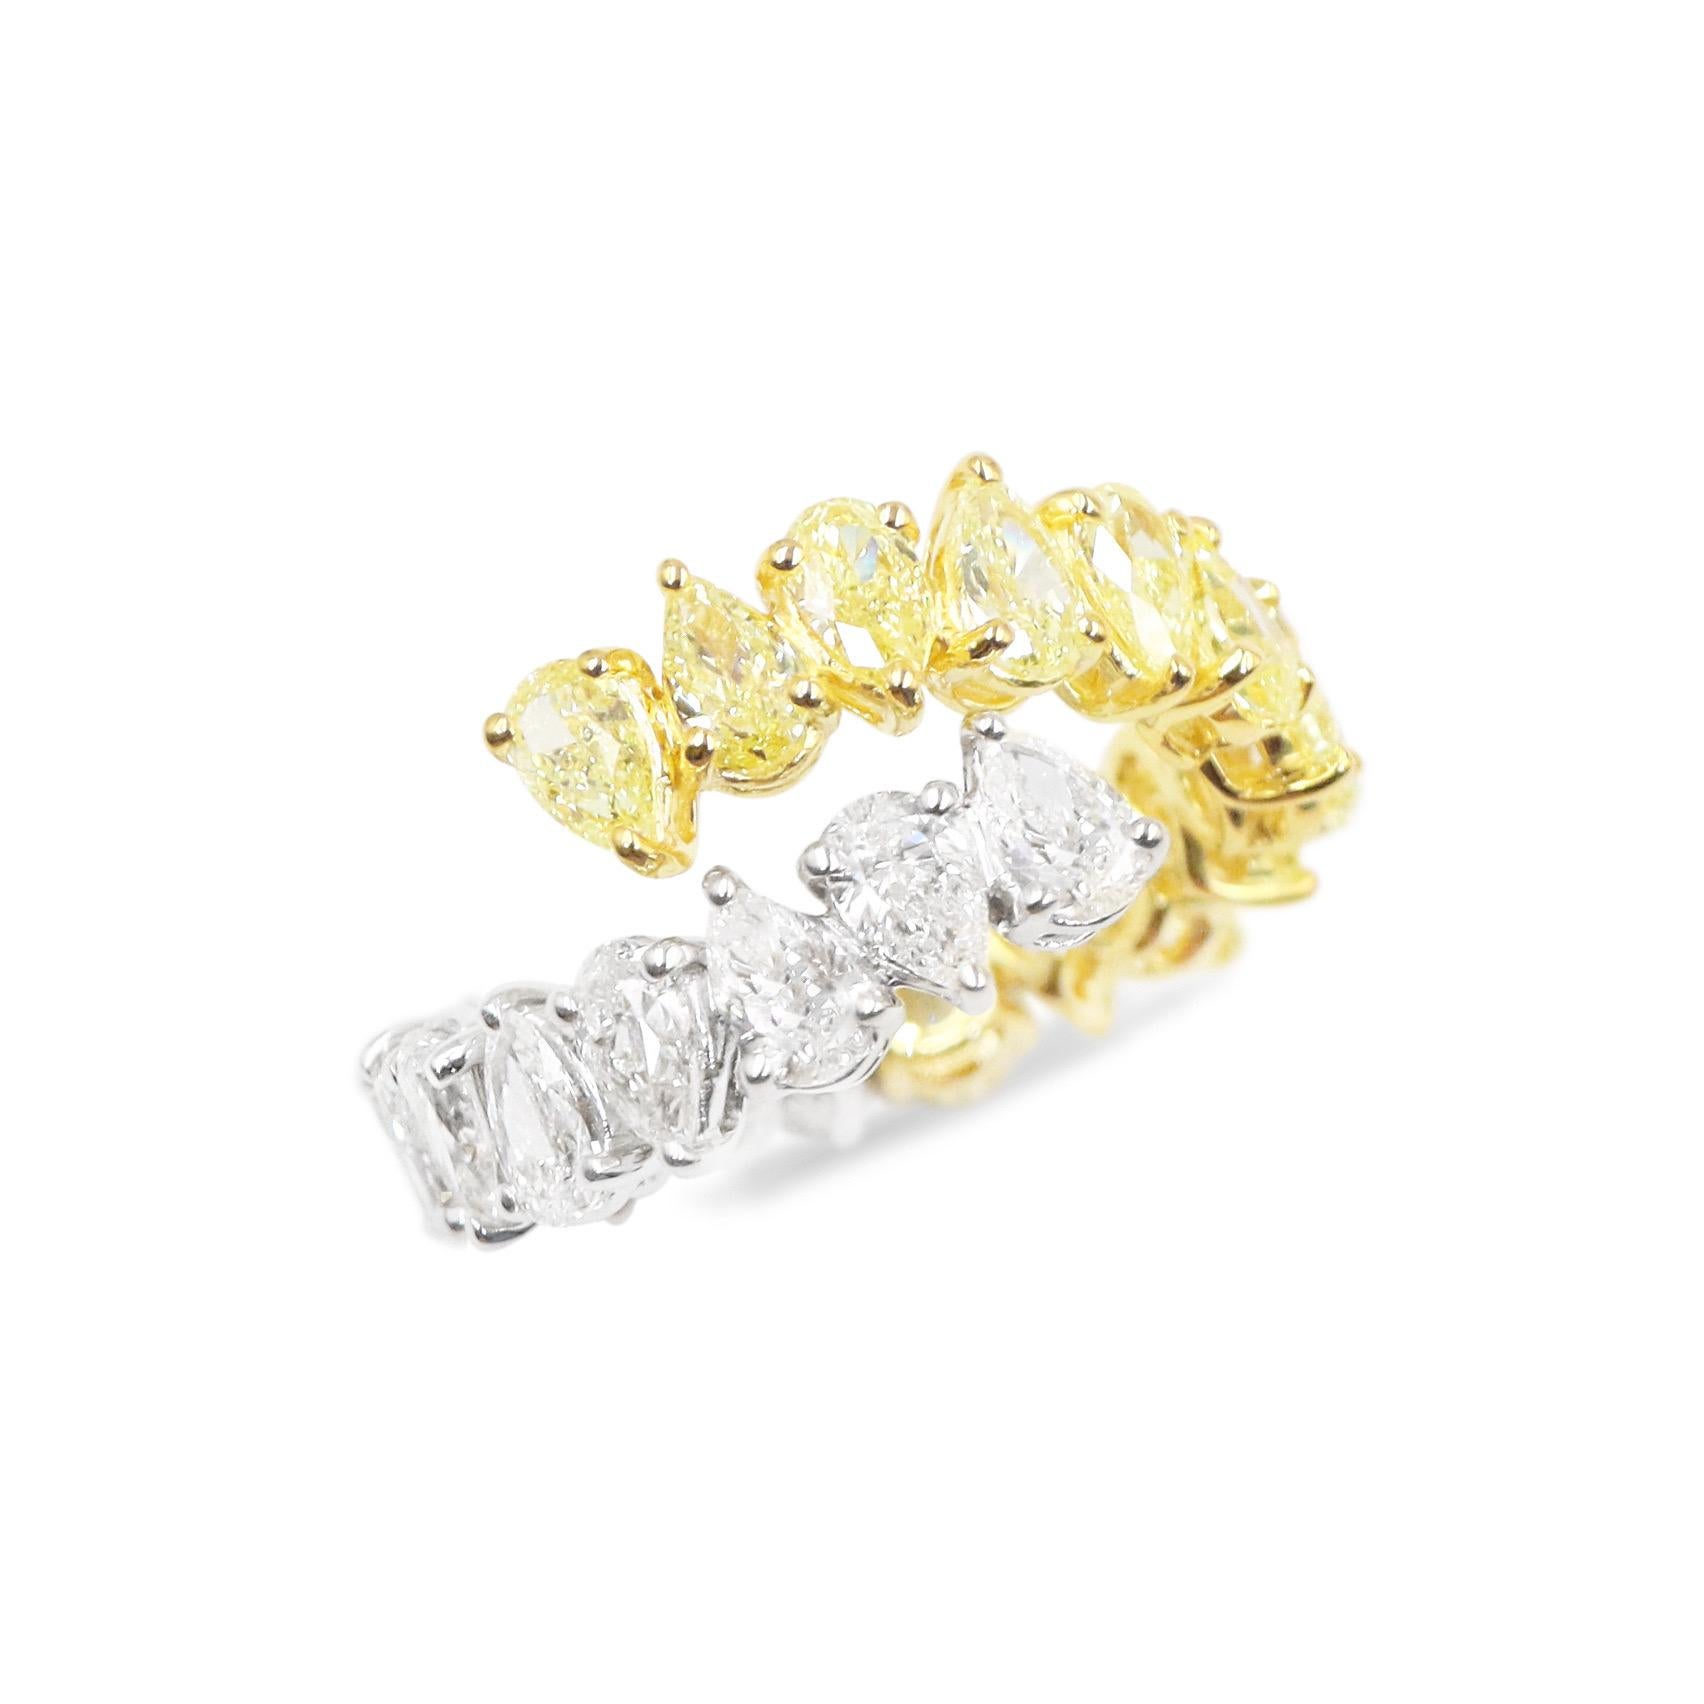 A very unique classic everyday ring from Emilio Jewelry New York! 
Clarity: Vs1-vs2 
Color: Natural yellow and colorless diamonds 
Diamond Weight: 4.71 carats
Please inquire for additional details. All pieces are hand made in the Emilio Jewelry